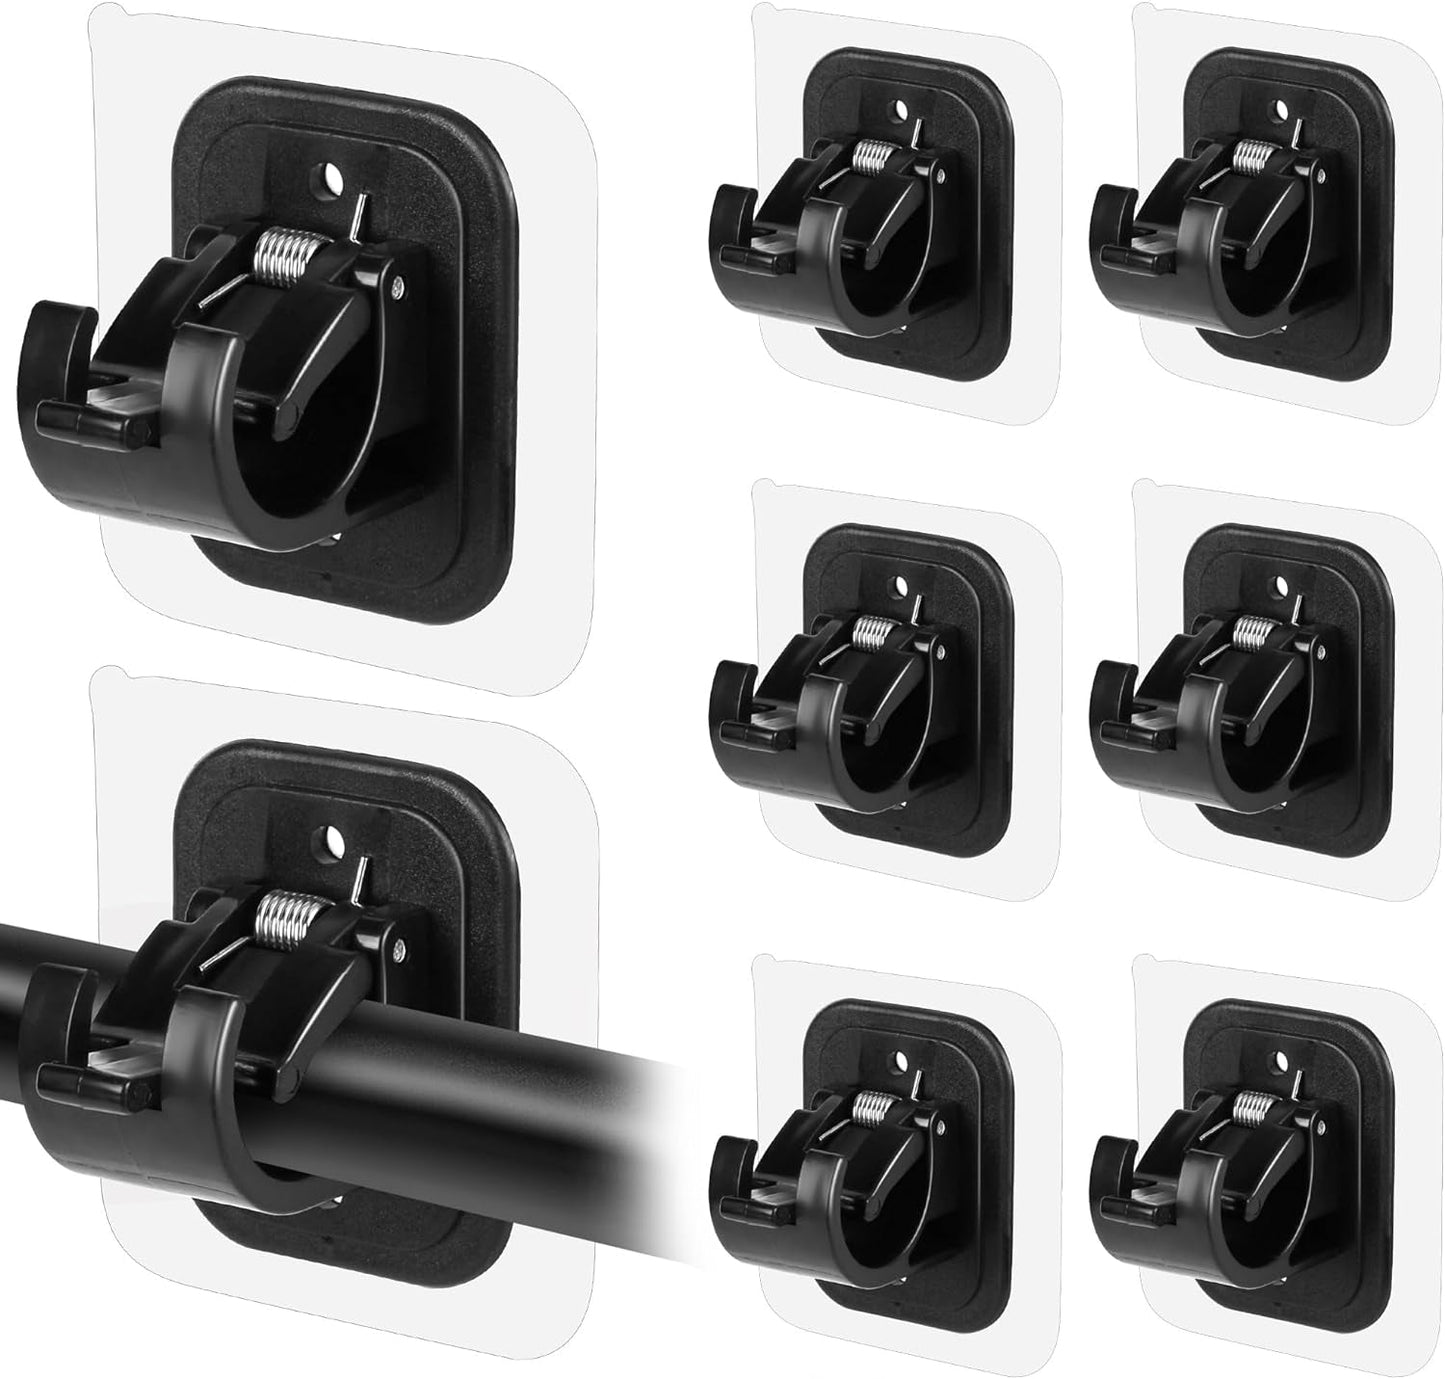 8PCS No Drill Curtain Rod Brackets No Drilling Self Adhesive Curtain Rod Holder Hooks Nail Free Adjustable Curtain Rod Hooks Curtain Hangers for Bathroom Kitchen Home Bathroom and Hotel (Transparent)